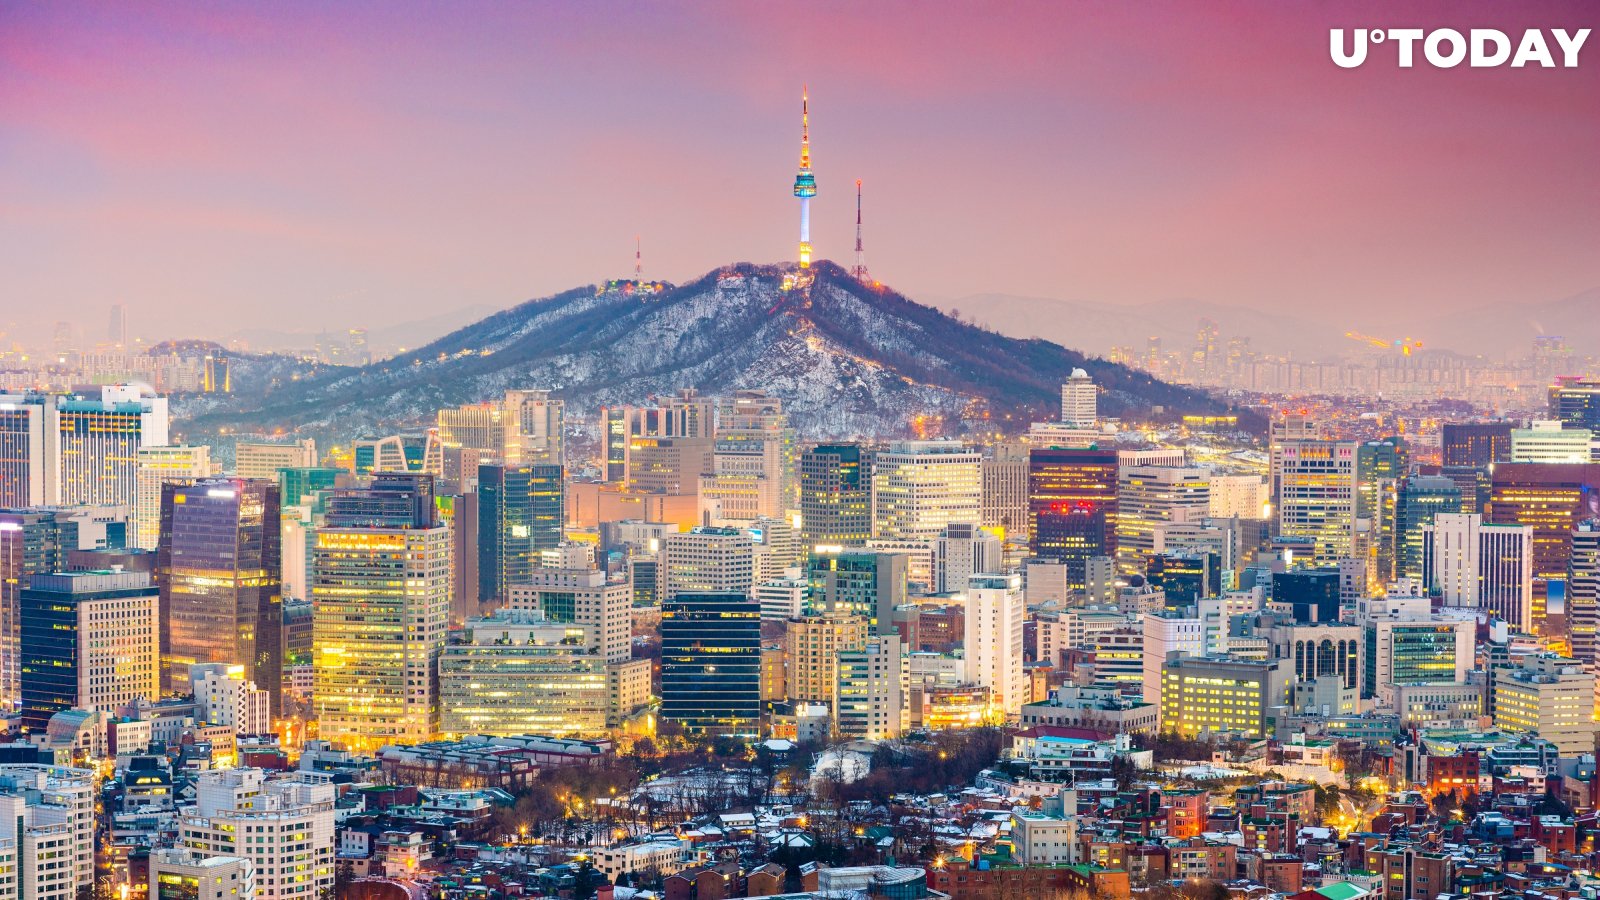 XRP and SHIB Just Surpassed Bitcoin in Key Metric in South Korea